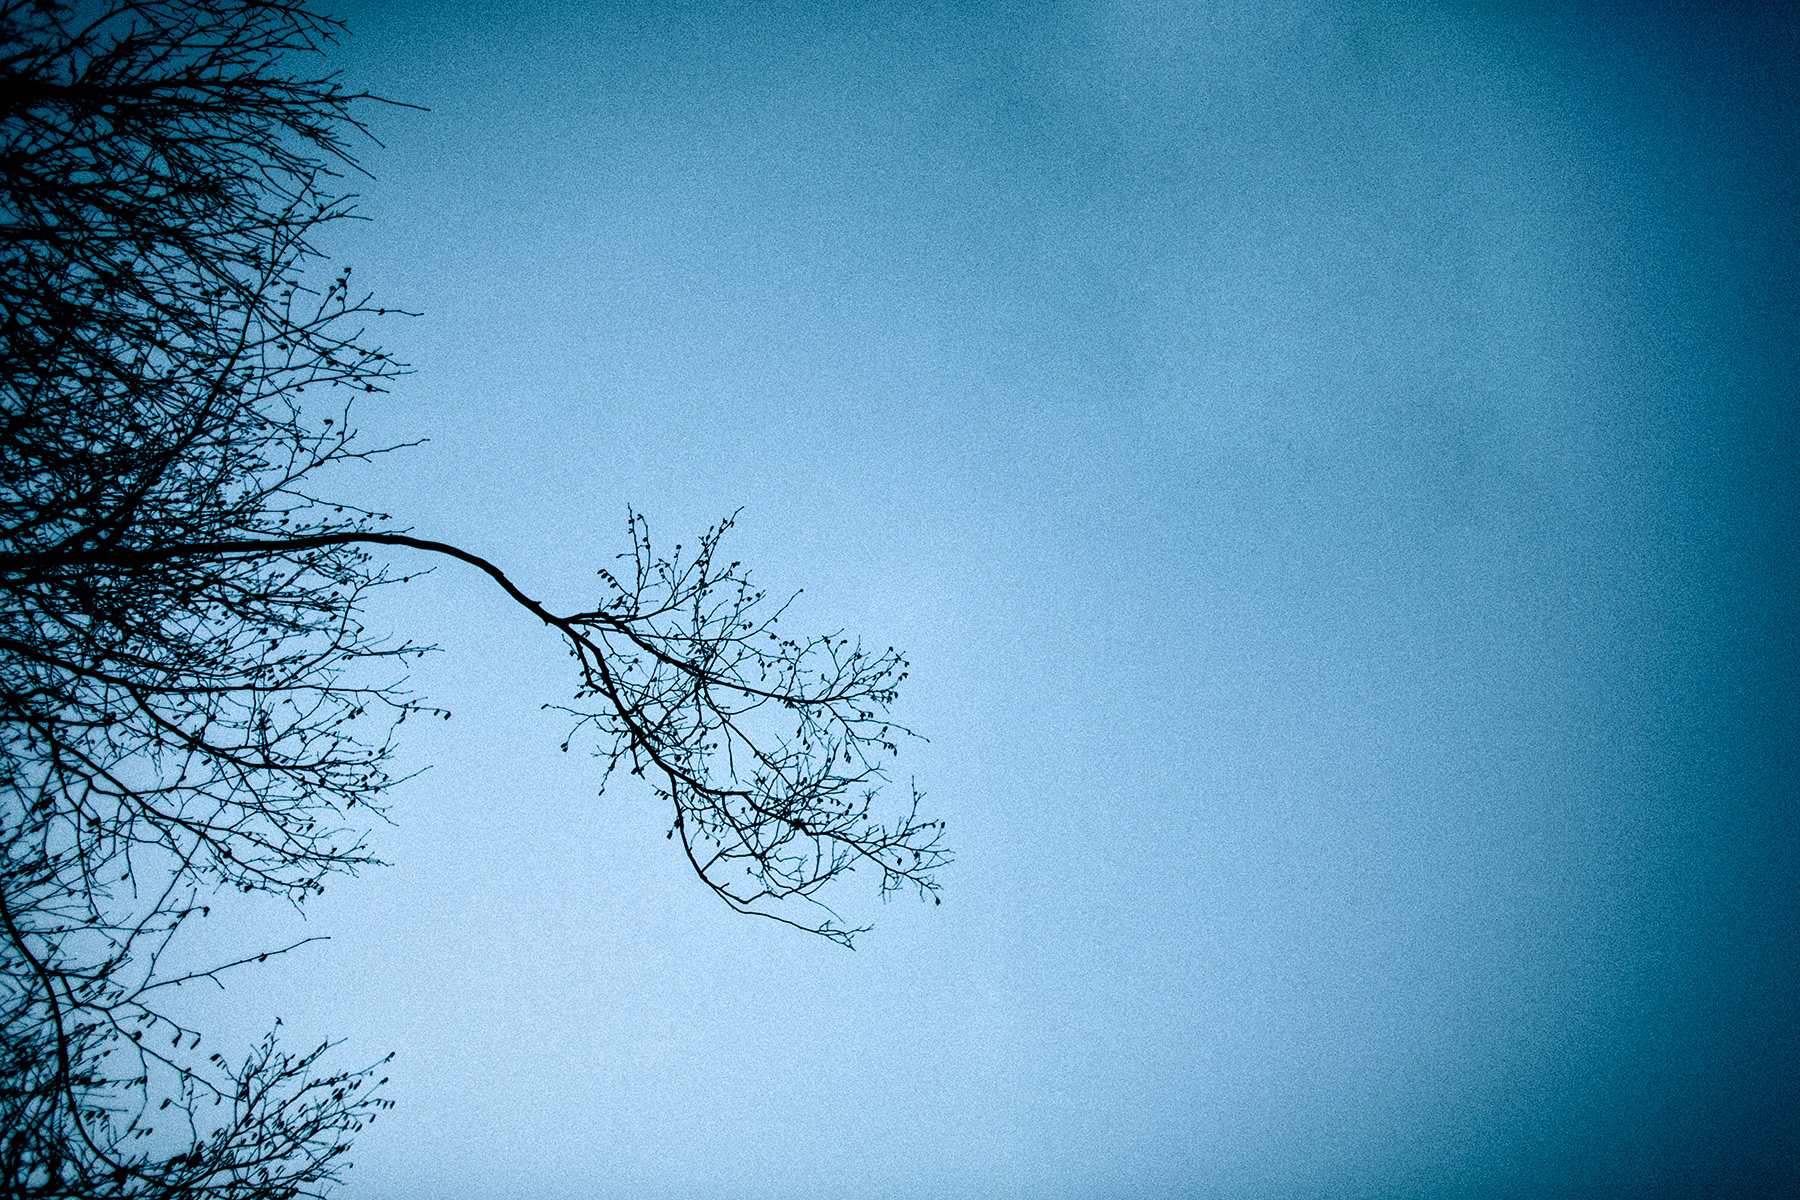 Artistic photographs of branches, silhouetting on a backround of the blue dusk skies